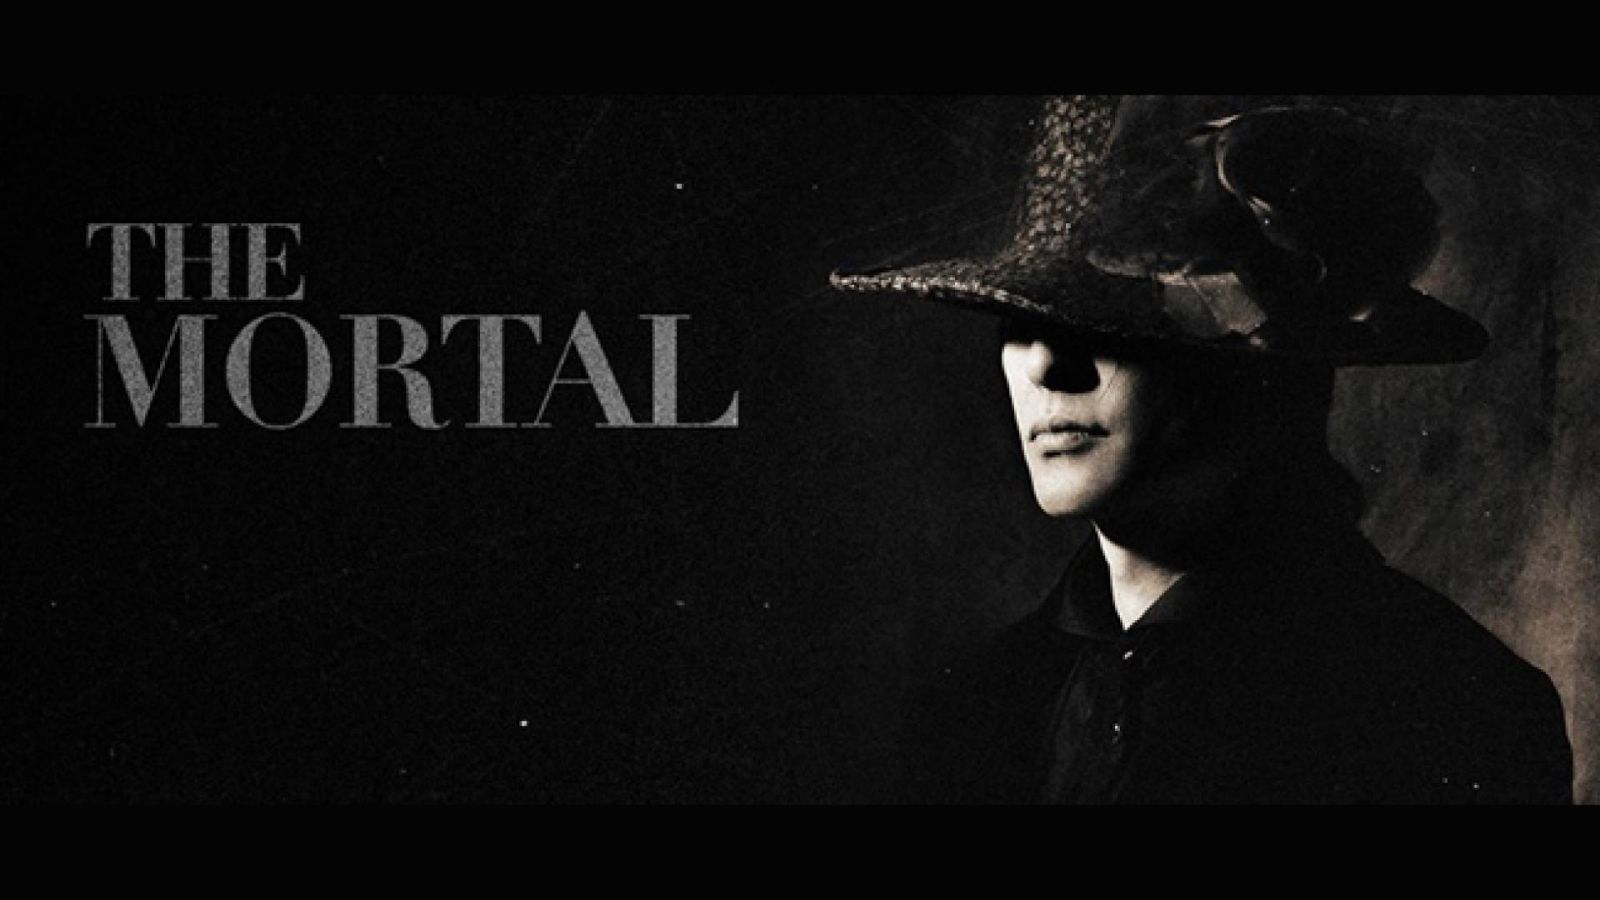 THE MORTAL © THE MORTAL. All rights reserved.